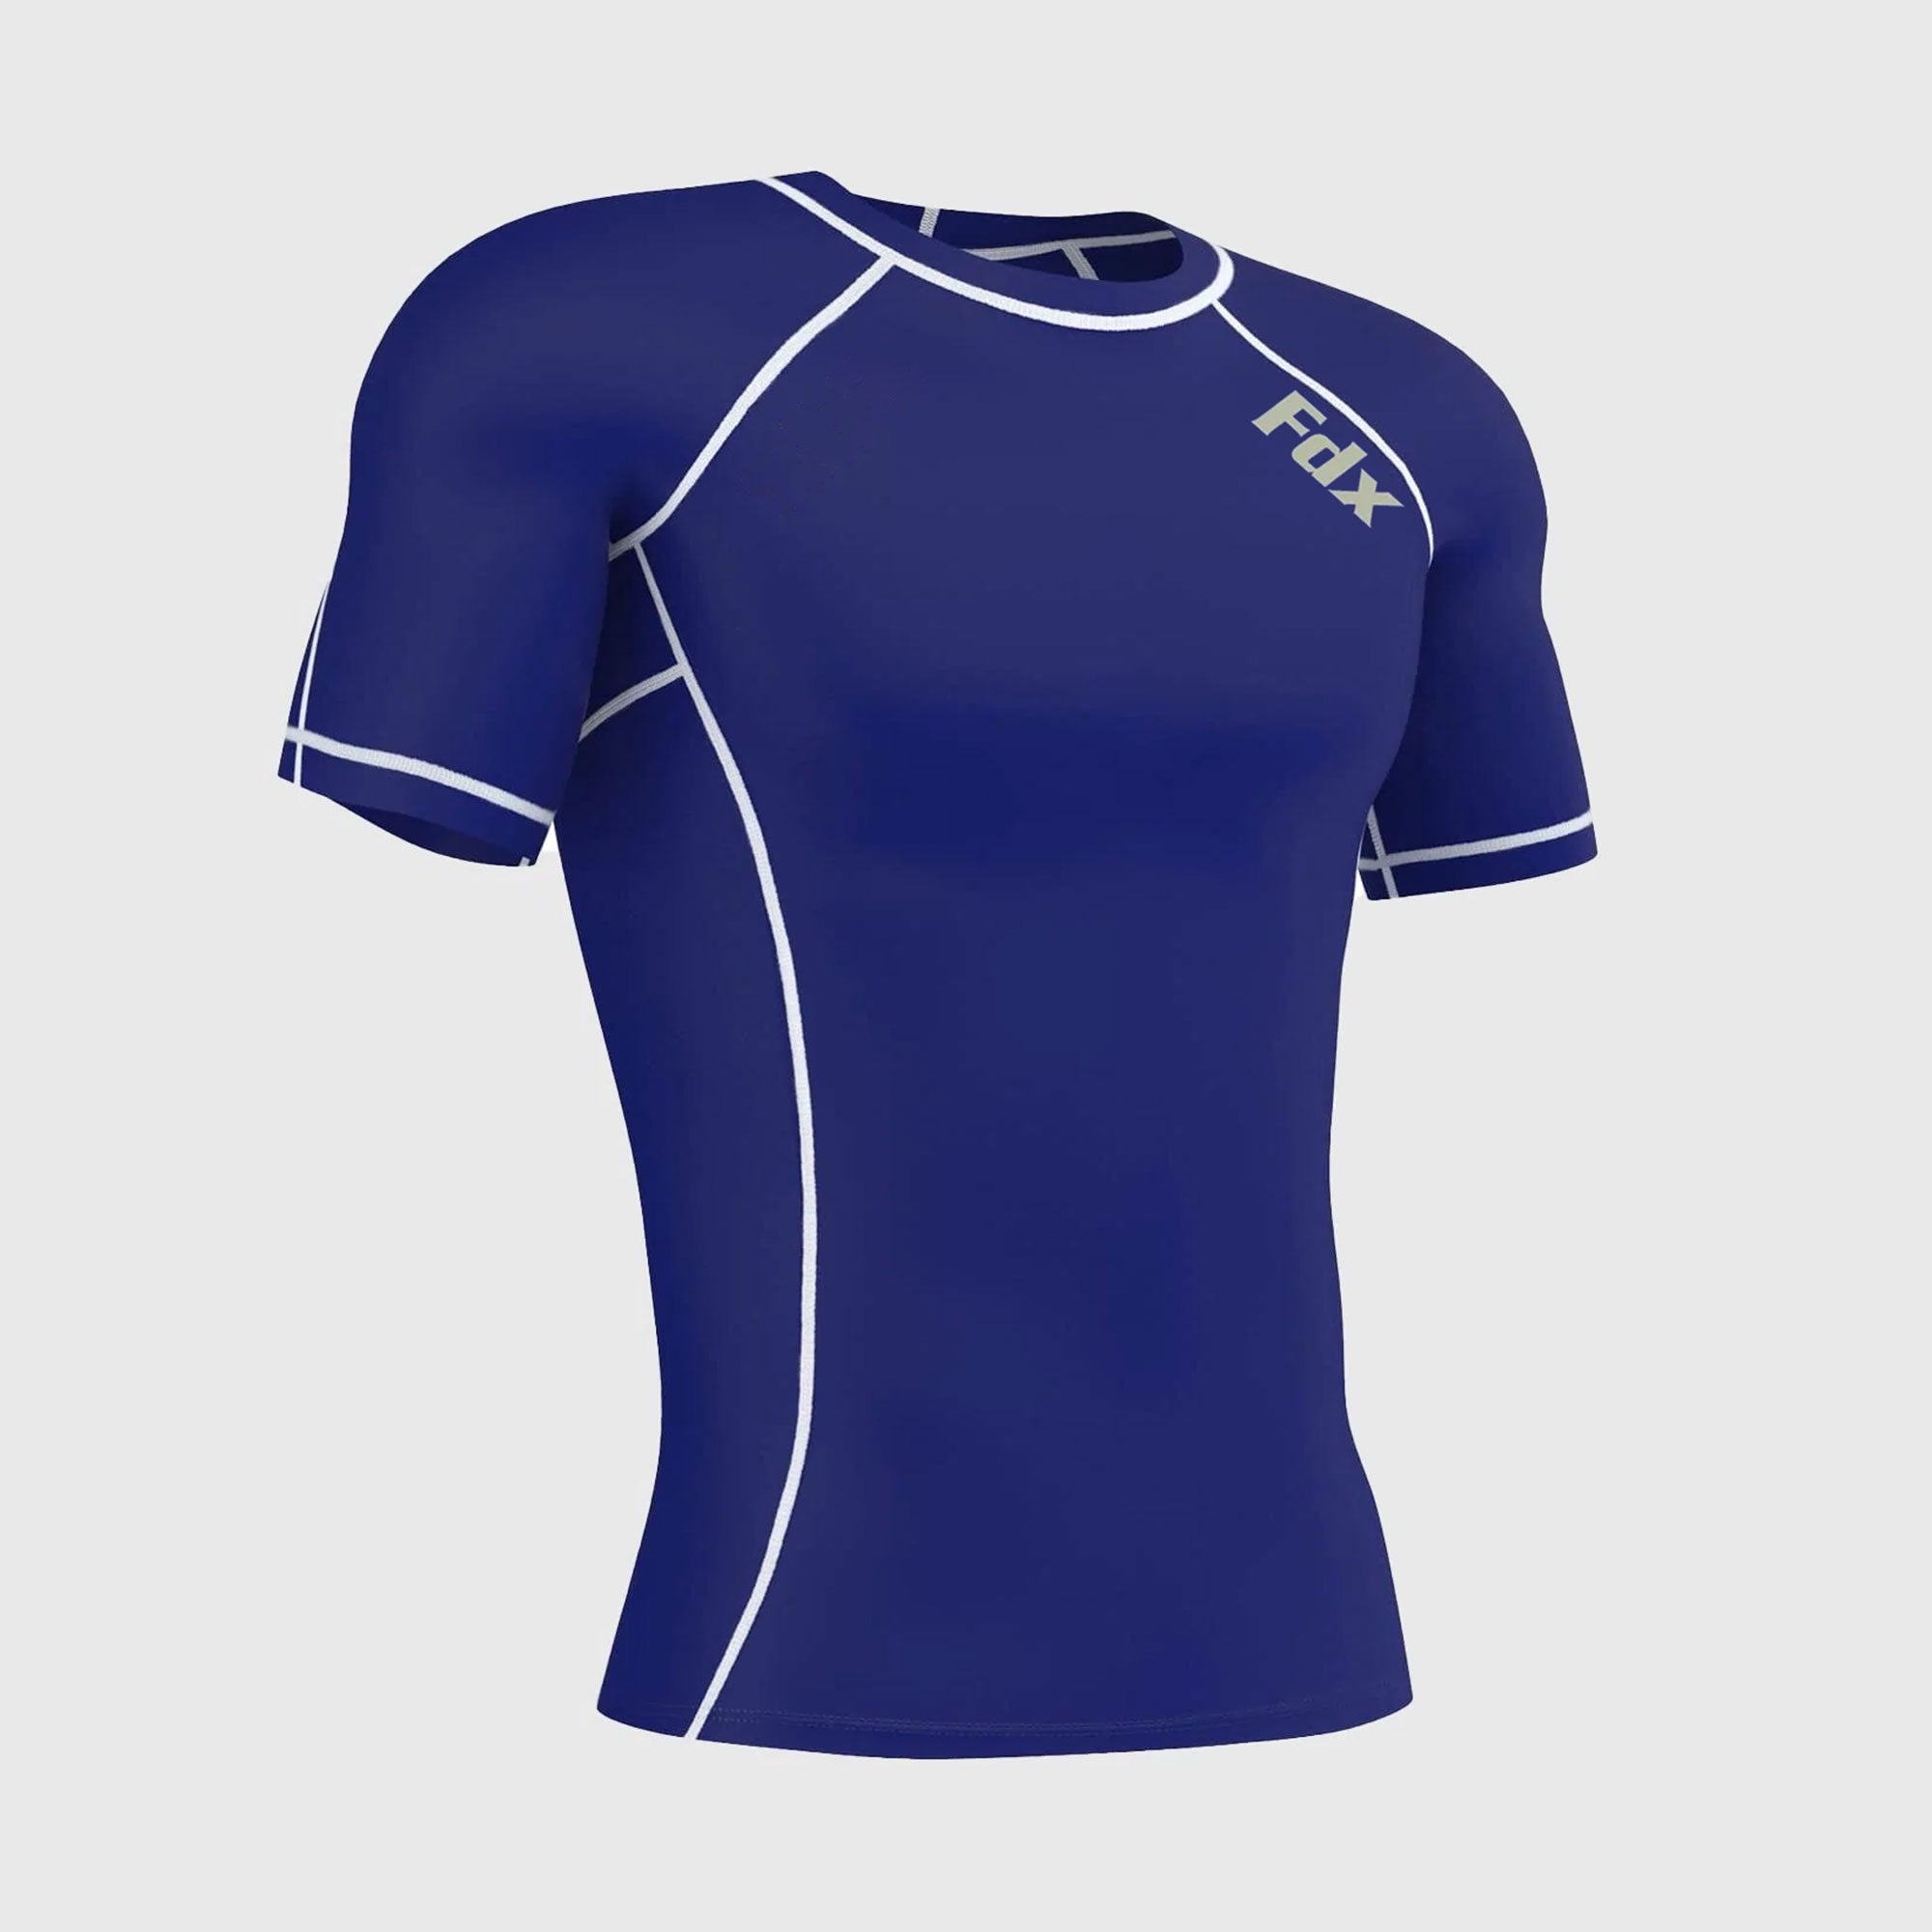 Related: Blue Men 2 Short Sleeve Base Layer Top